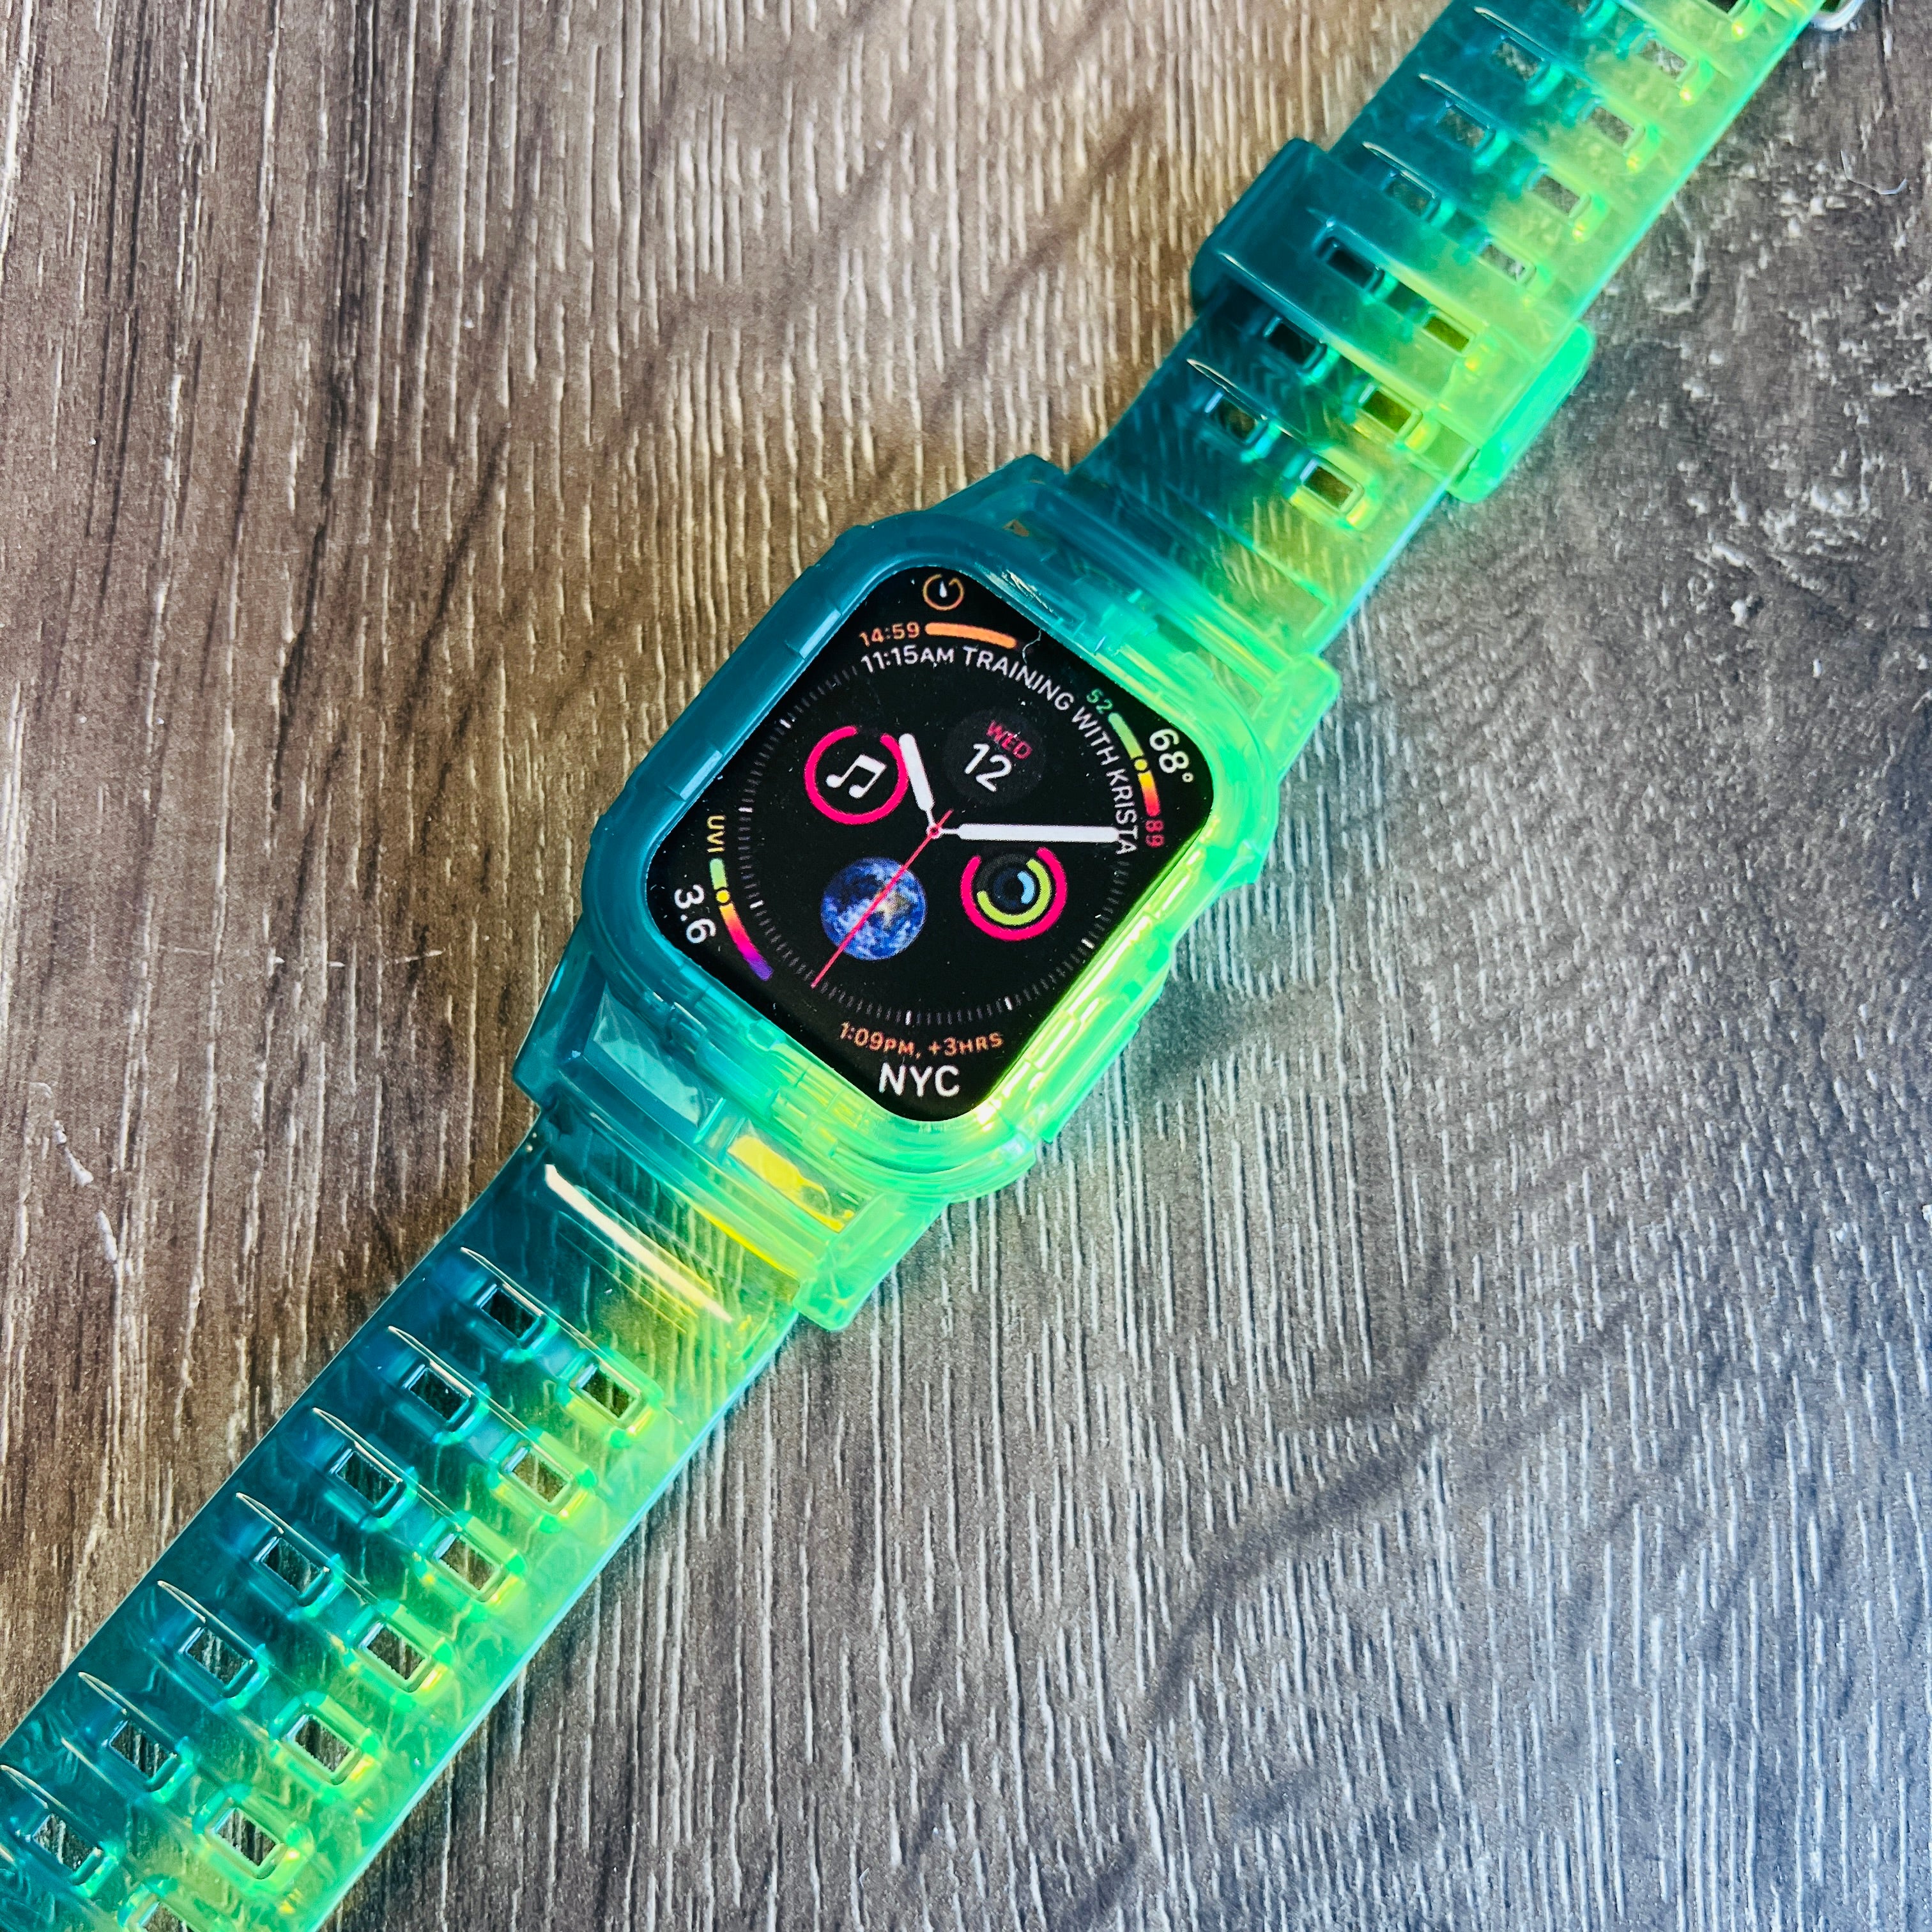 All In One Attached Bumper/Case Sport TPU Band For Apple Watch Multiple Colors Available